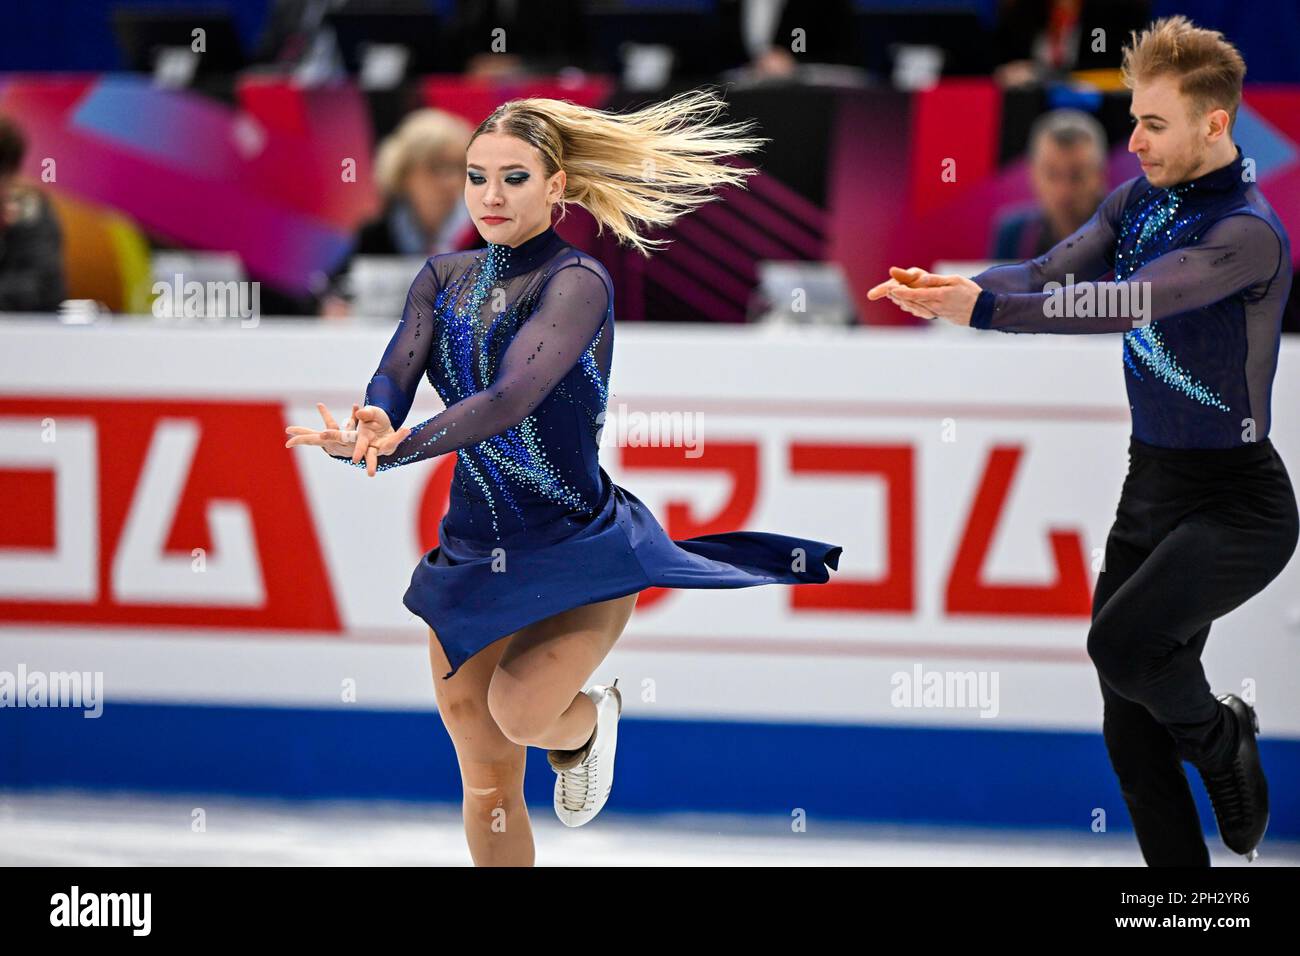 SAITAMA, JAPAN - MARCH 25: Natalie Taschlerova and Filip Taschler of Czech Republic competes in the Ice Dance Free Dance during the ISU World Figure Skating Championships 2023 at Saitama Super Arena on March 25, 2023 in Saitama, Japan (Photo by Pablo Morano/BSR Agency) Stock Photo